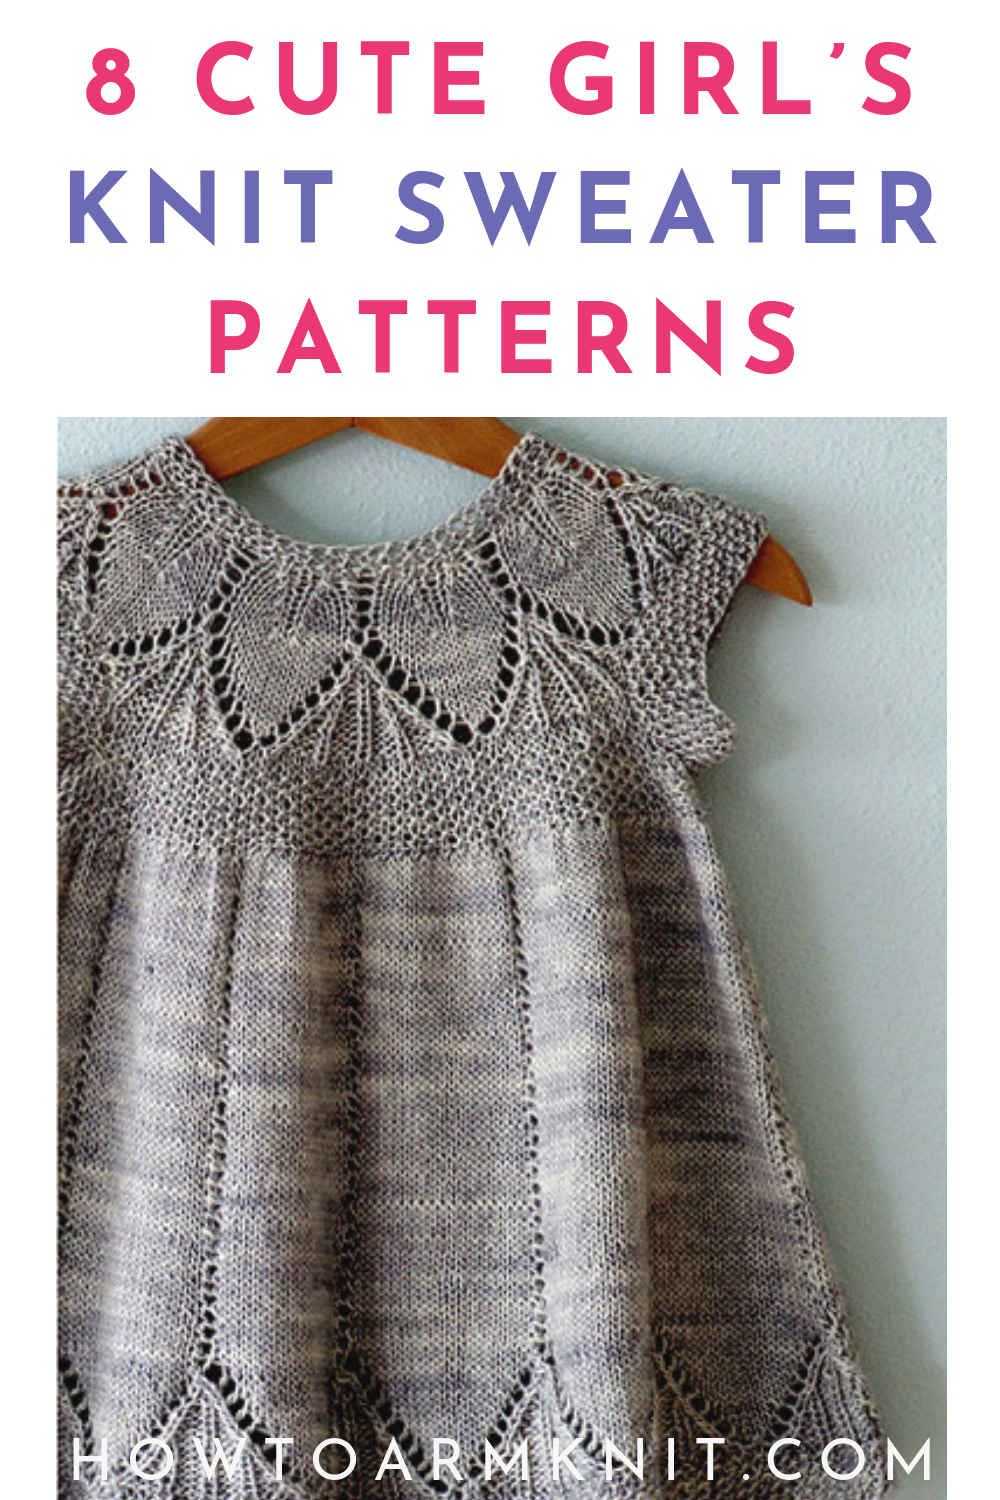 Top 8 Adorable Girl's Knit Sweater Patterns -   20 knitting and crochet Free Patterns girls ideas